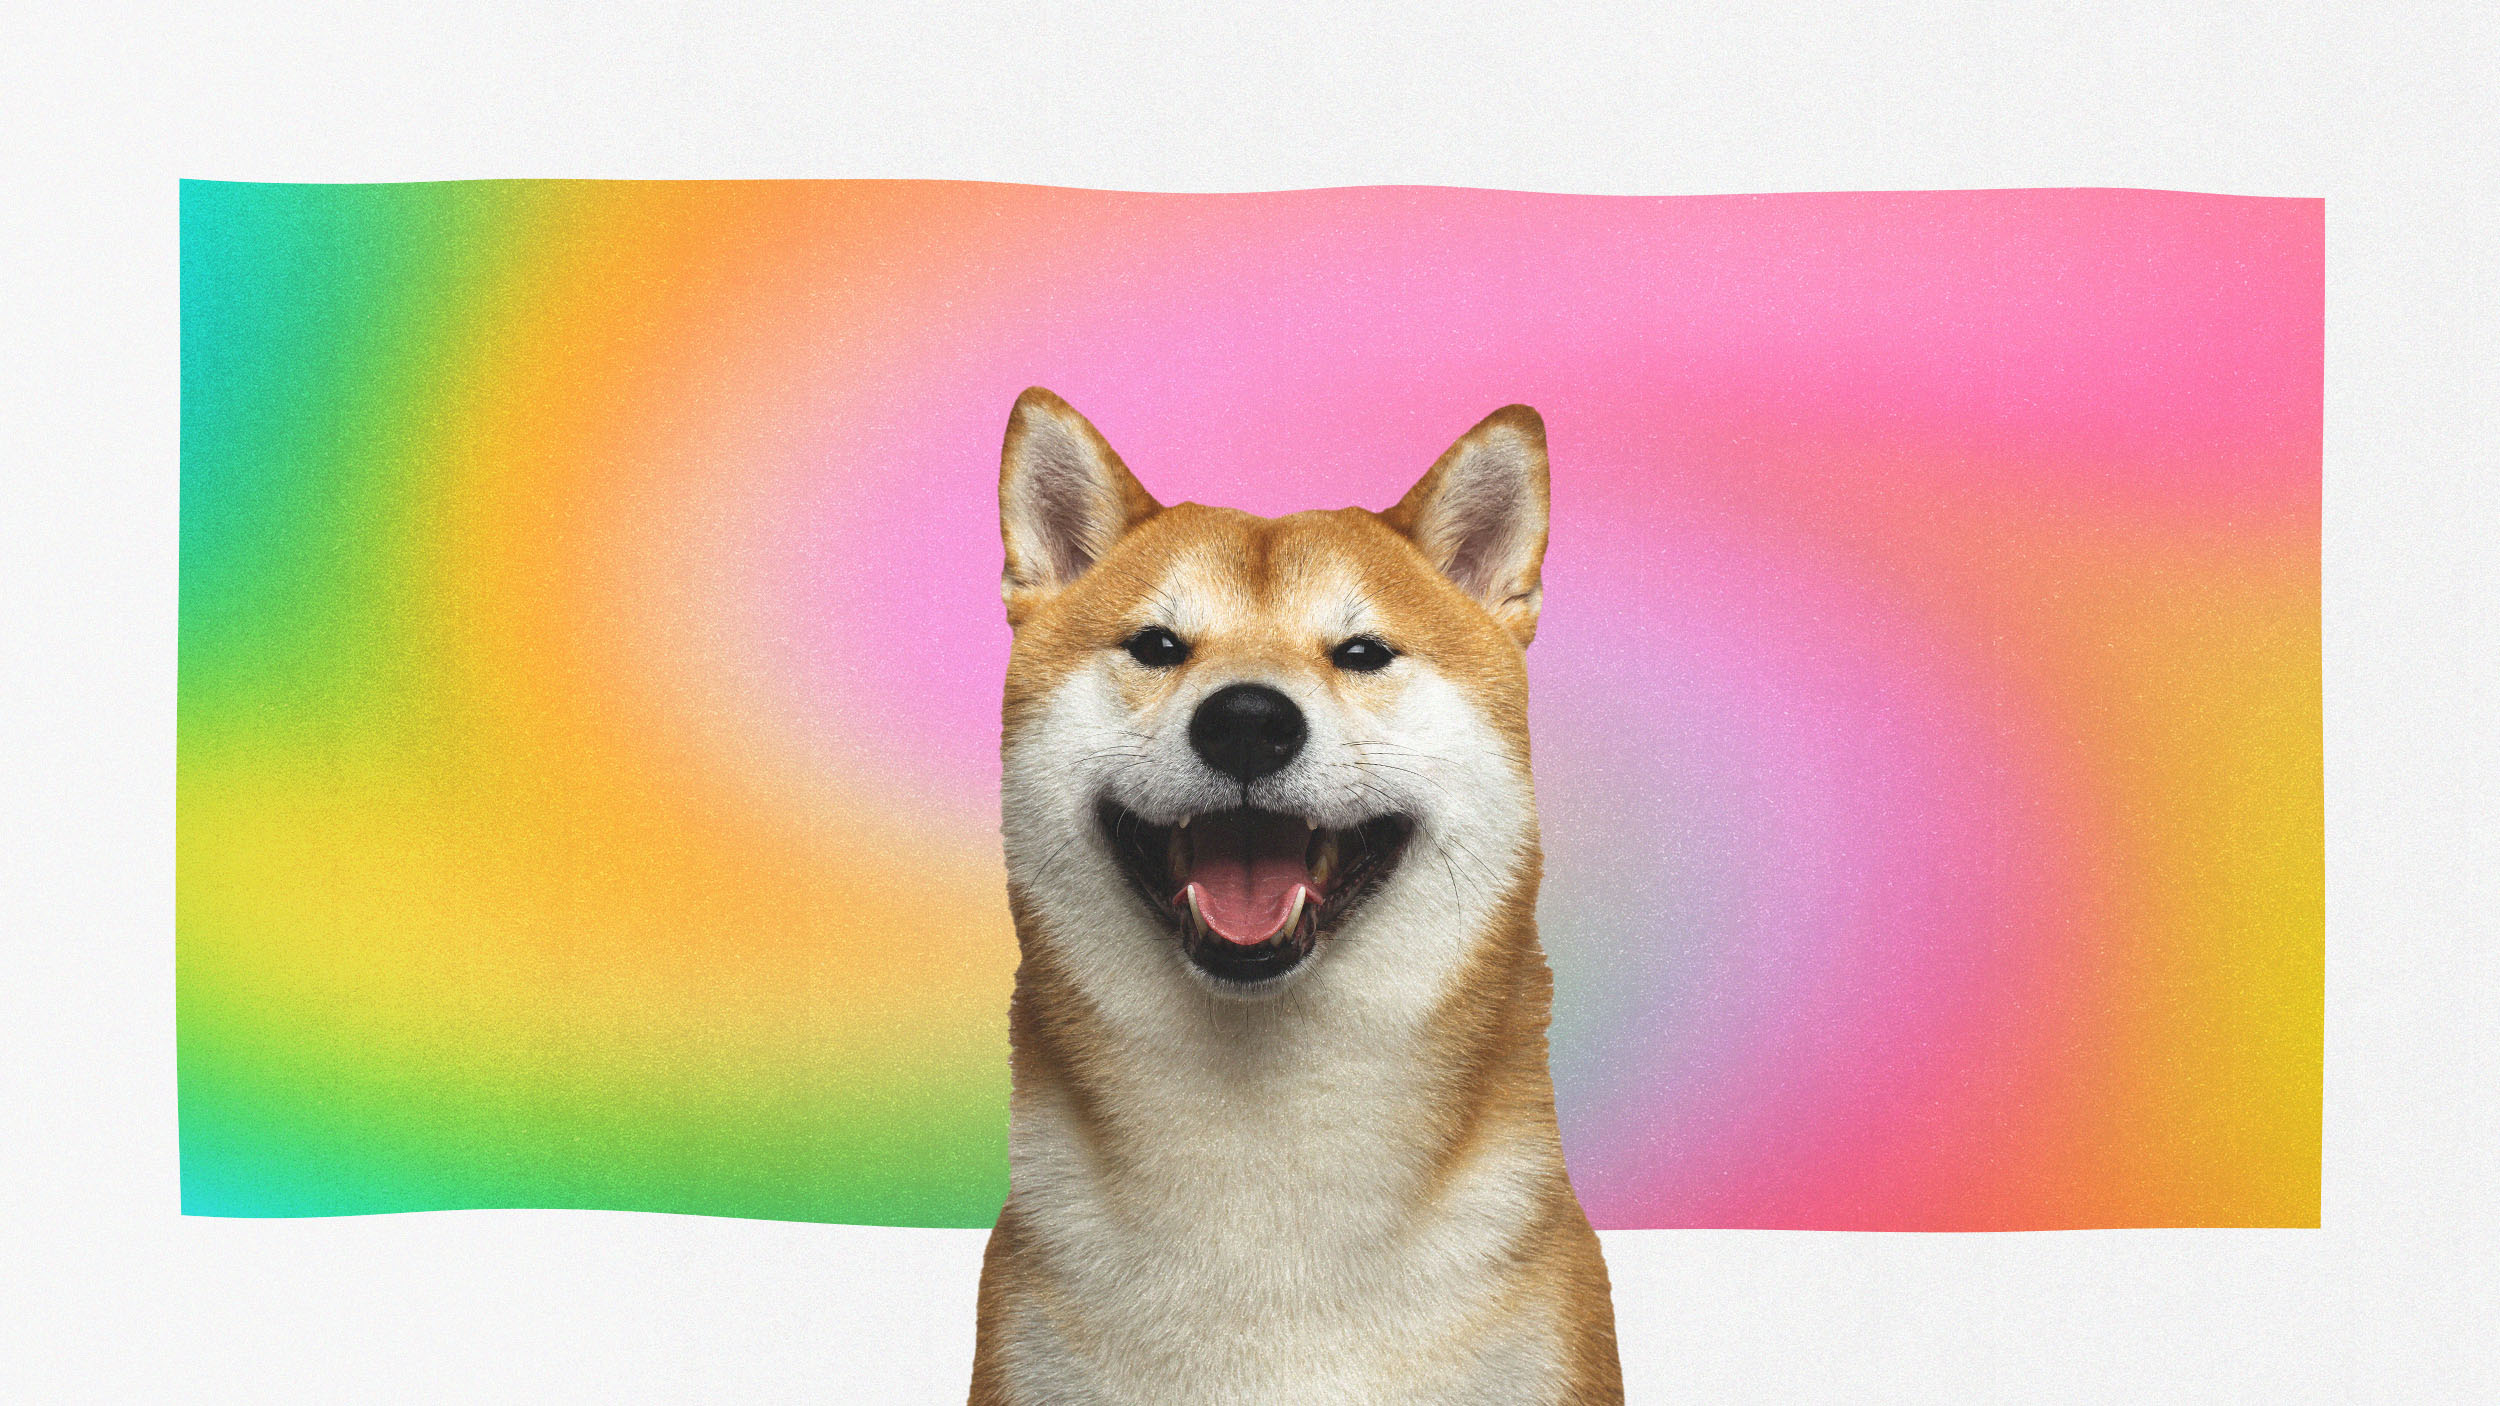 How the Shiba Inu became an Internet meme and took over the world